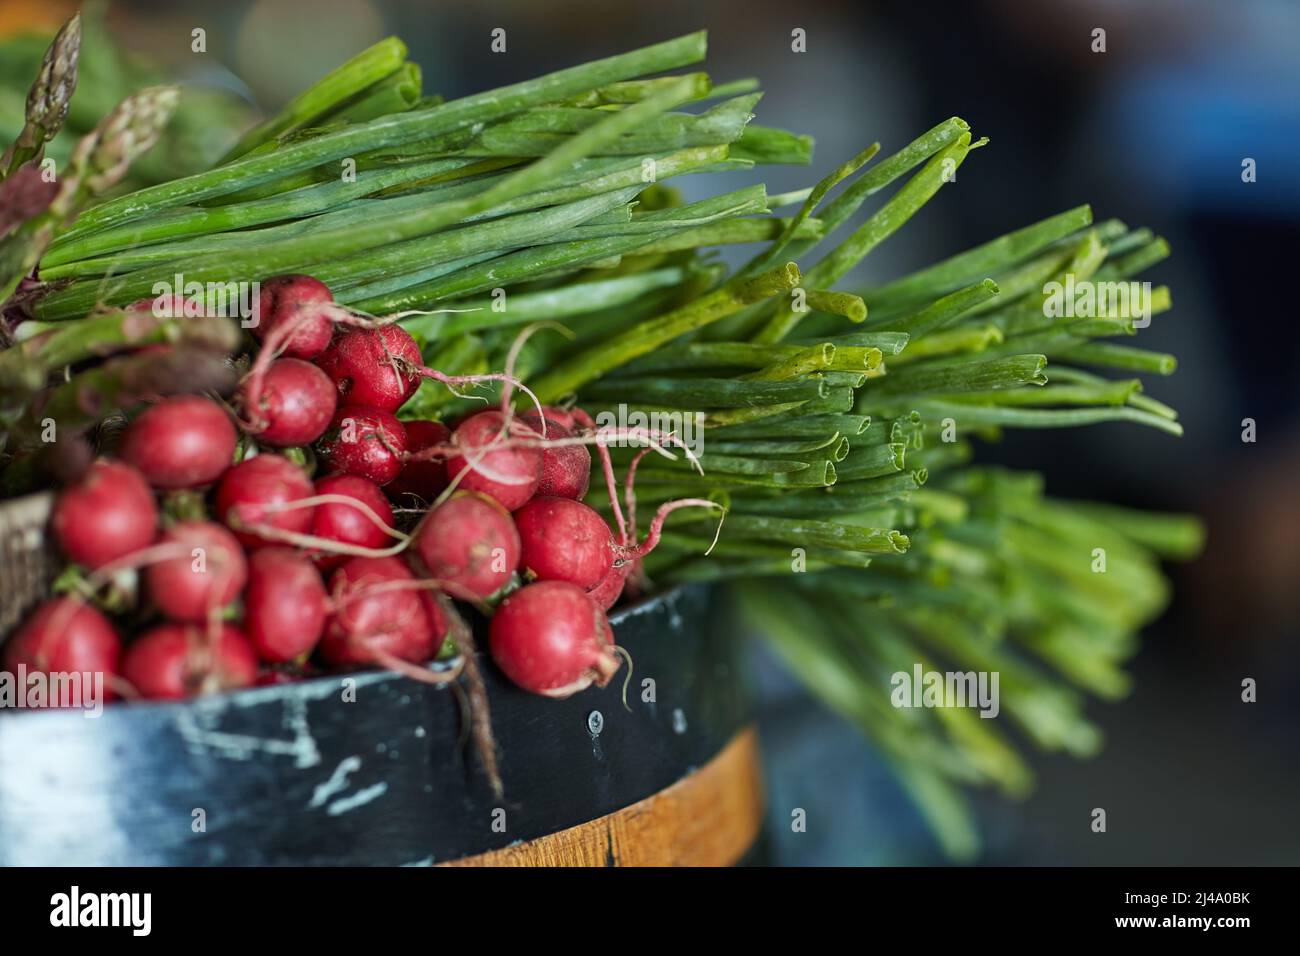 Organic is the way to go. Shot of fresh produce in a grocery store. Stock Photo